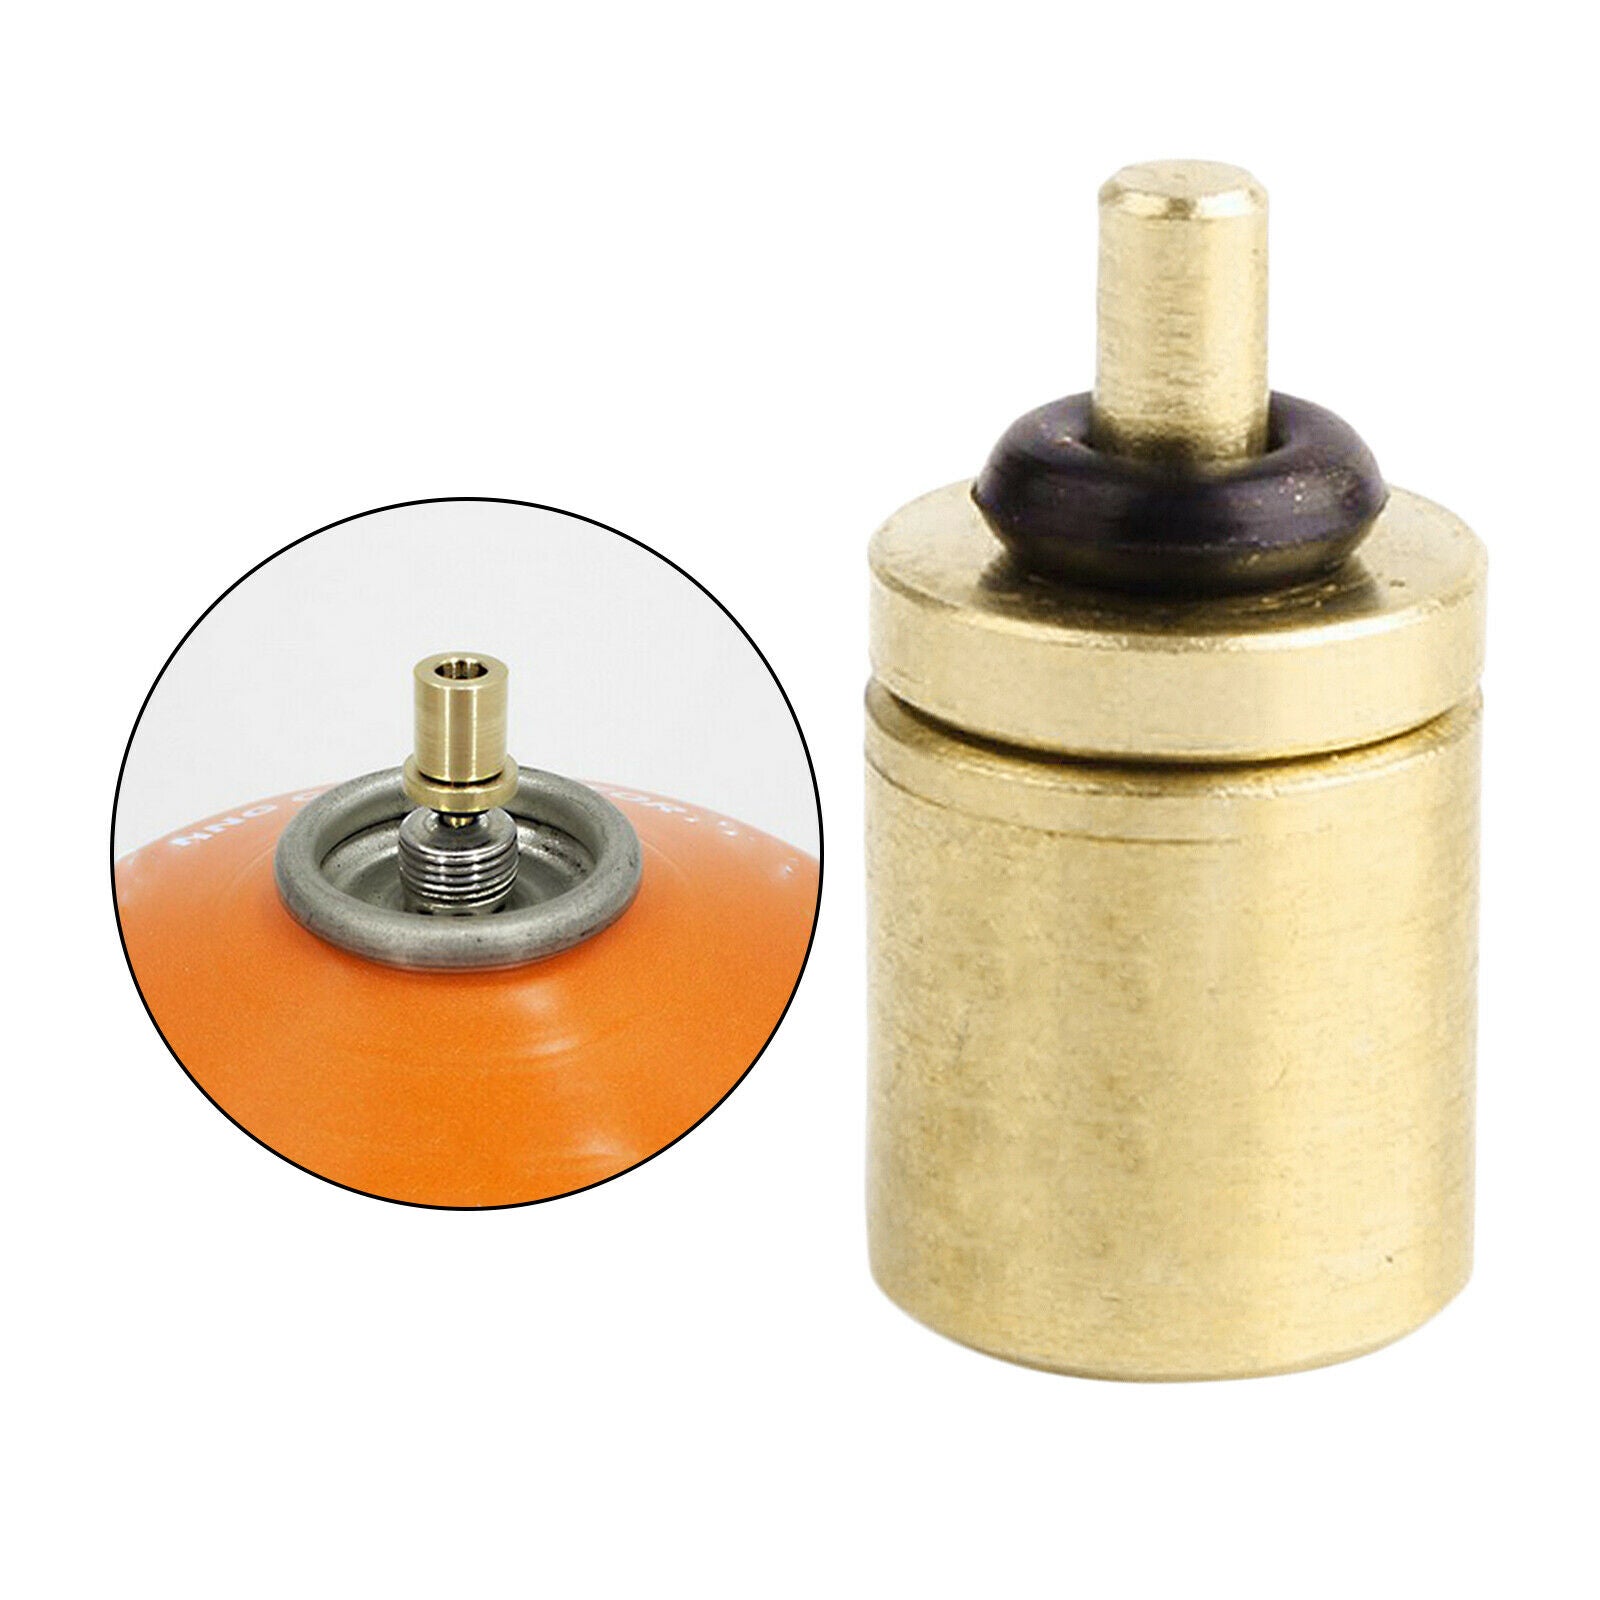 Refill Adapter Coupler Butane Canister Outdoor Camping BBQ Stove Supplies